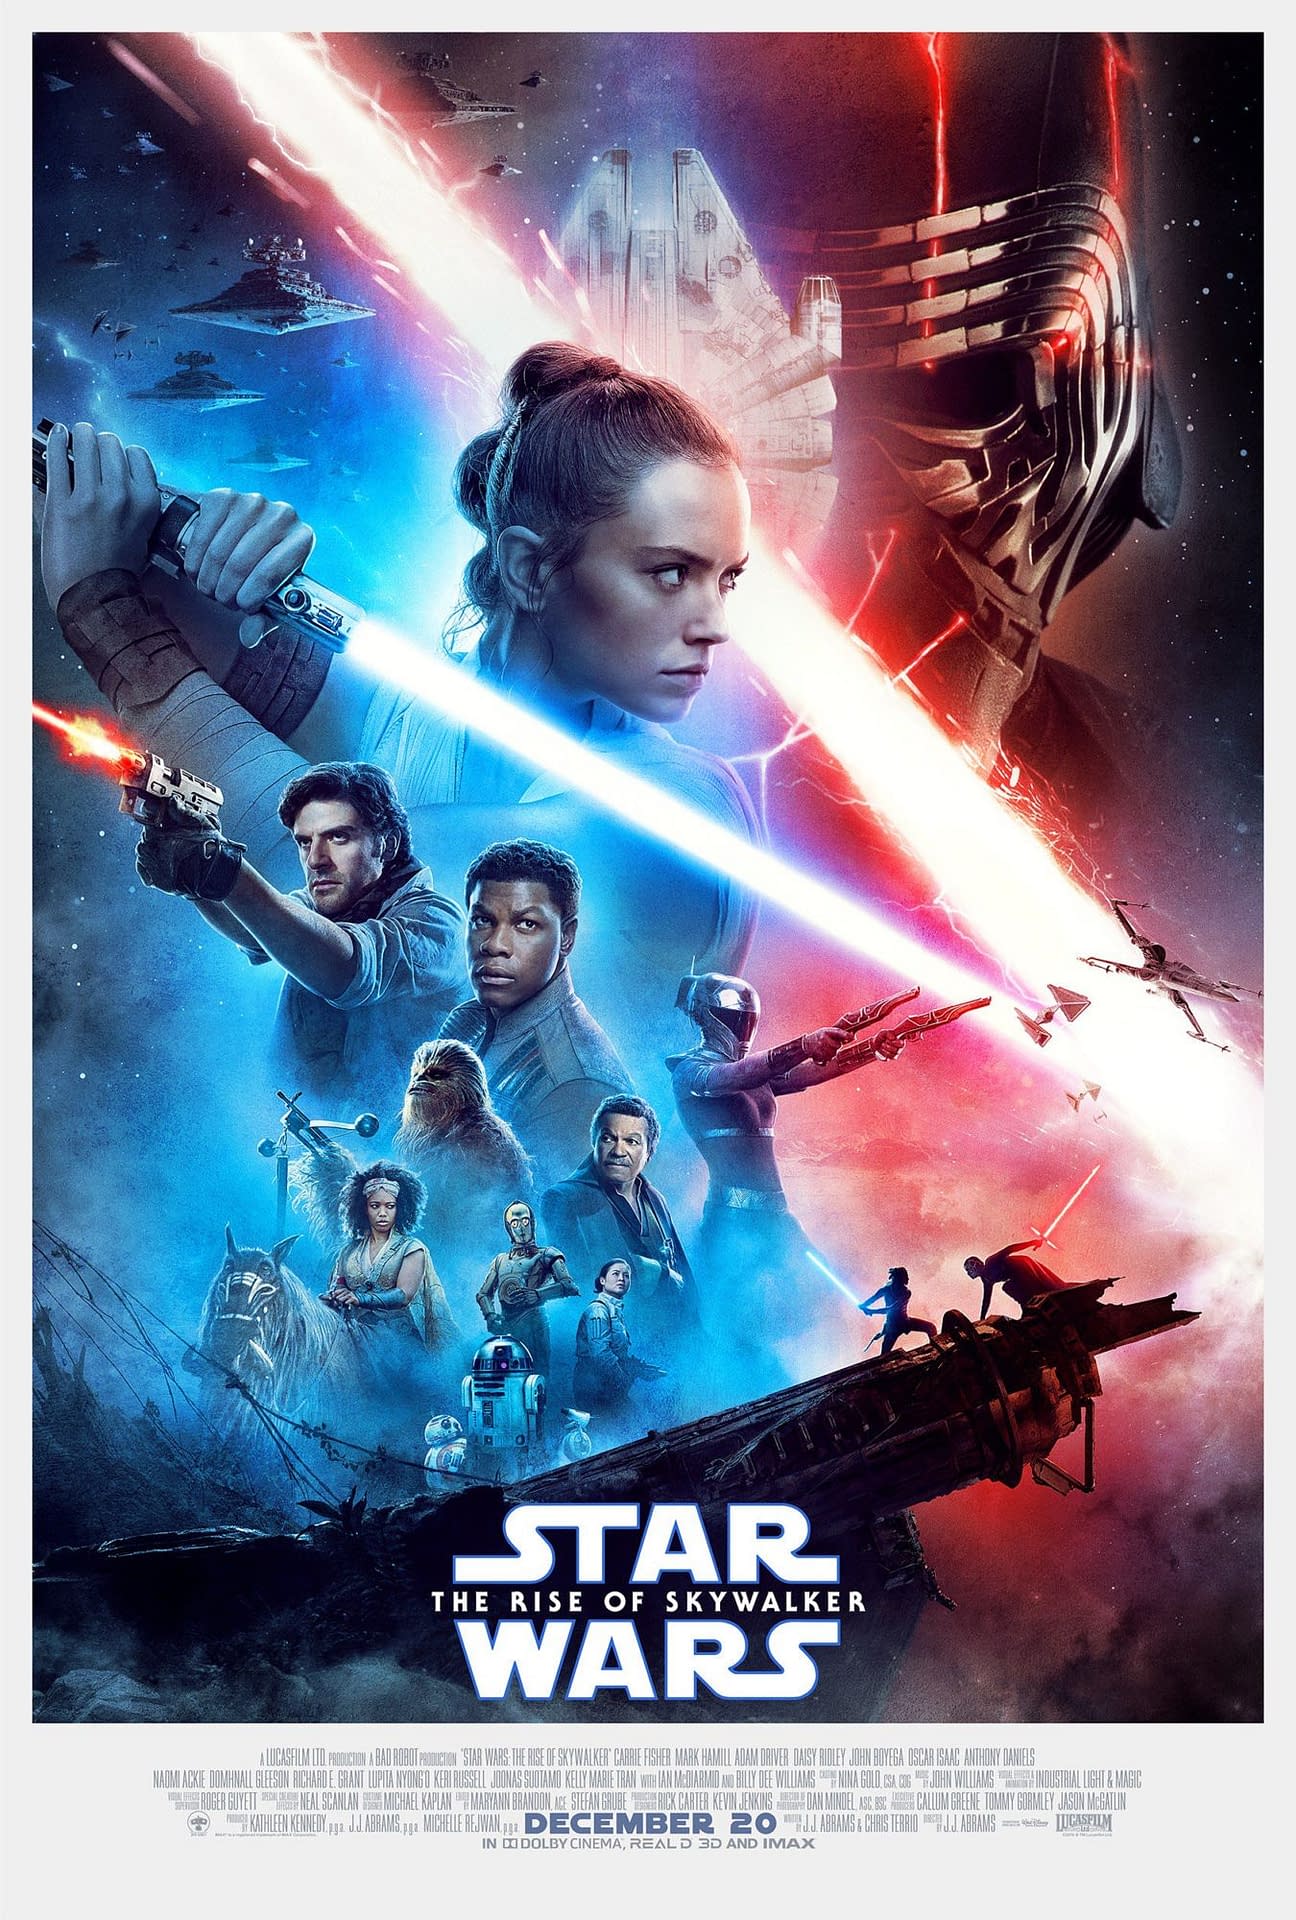 The Final Trailer and Poster for "Star Wars: The Rise of Skywalker" Drops